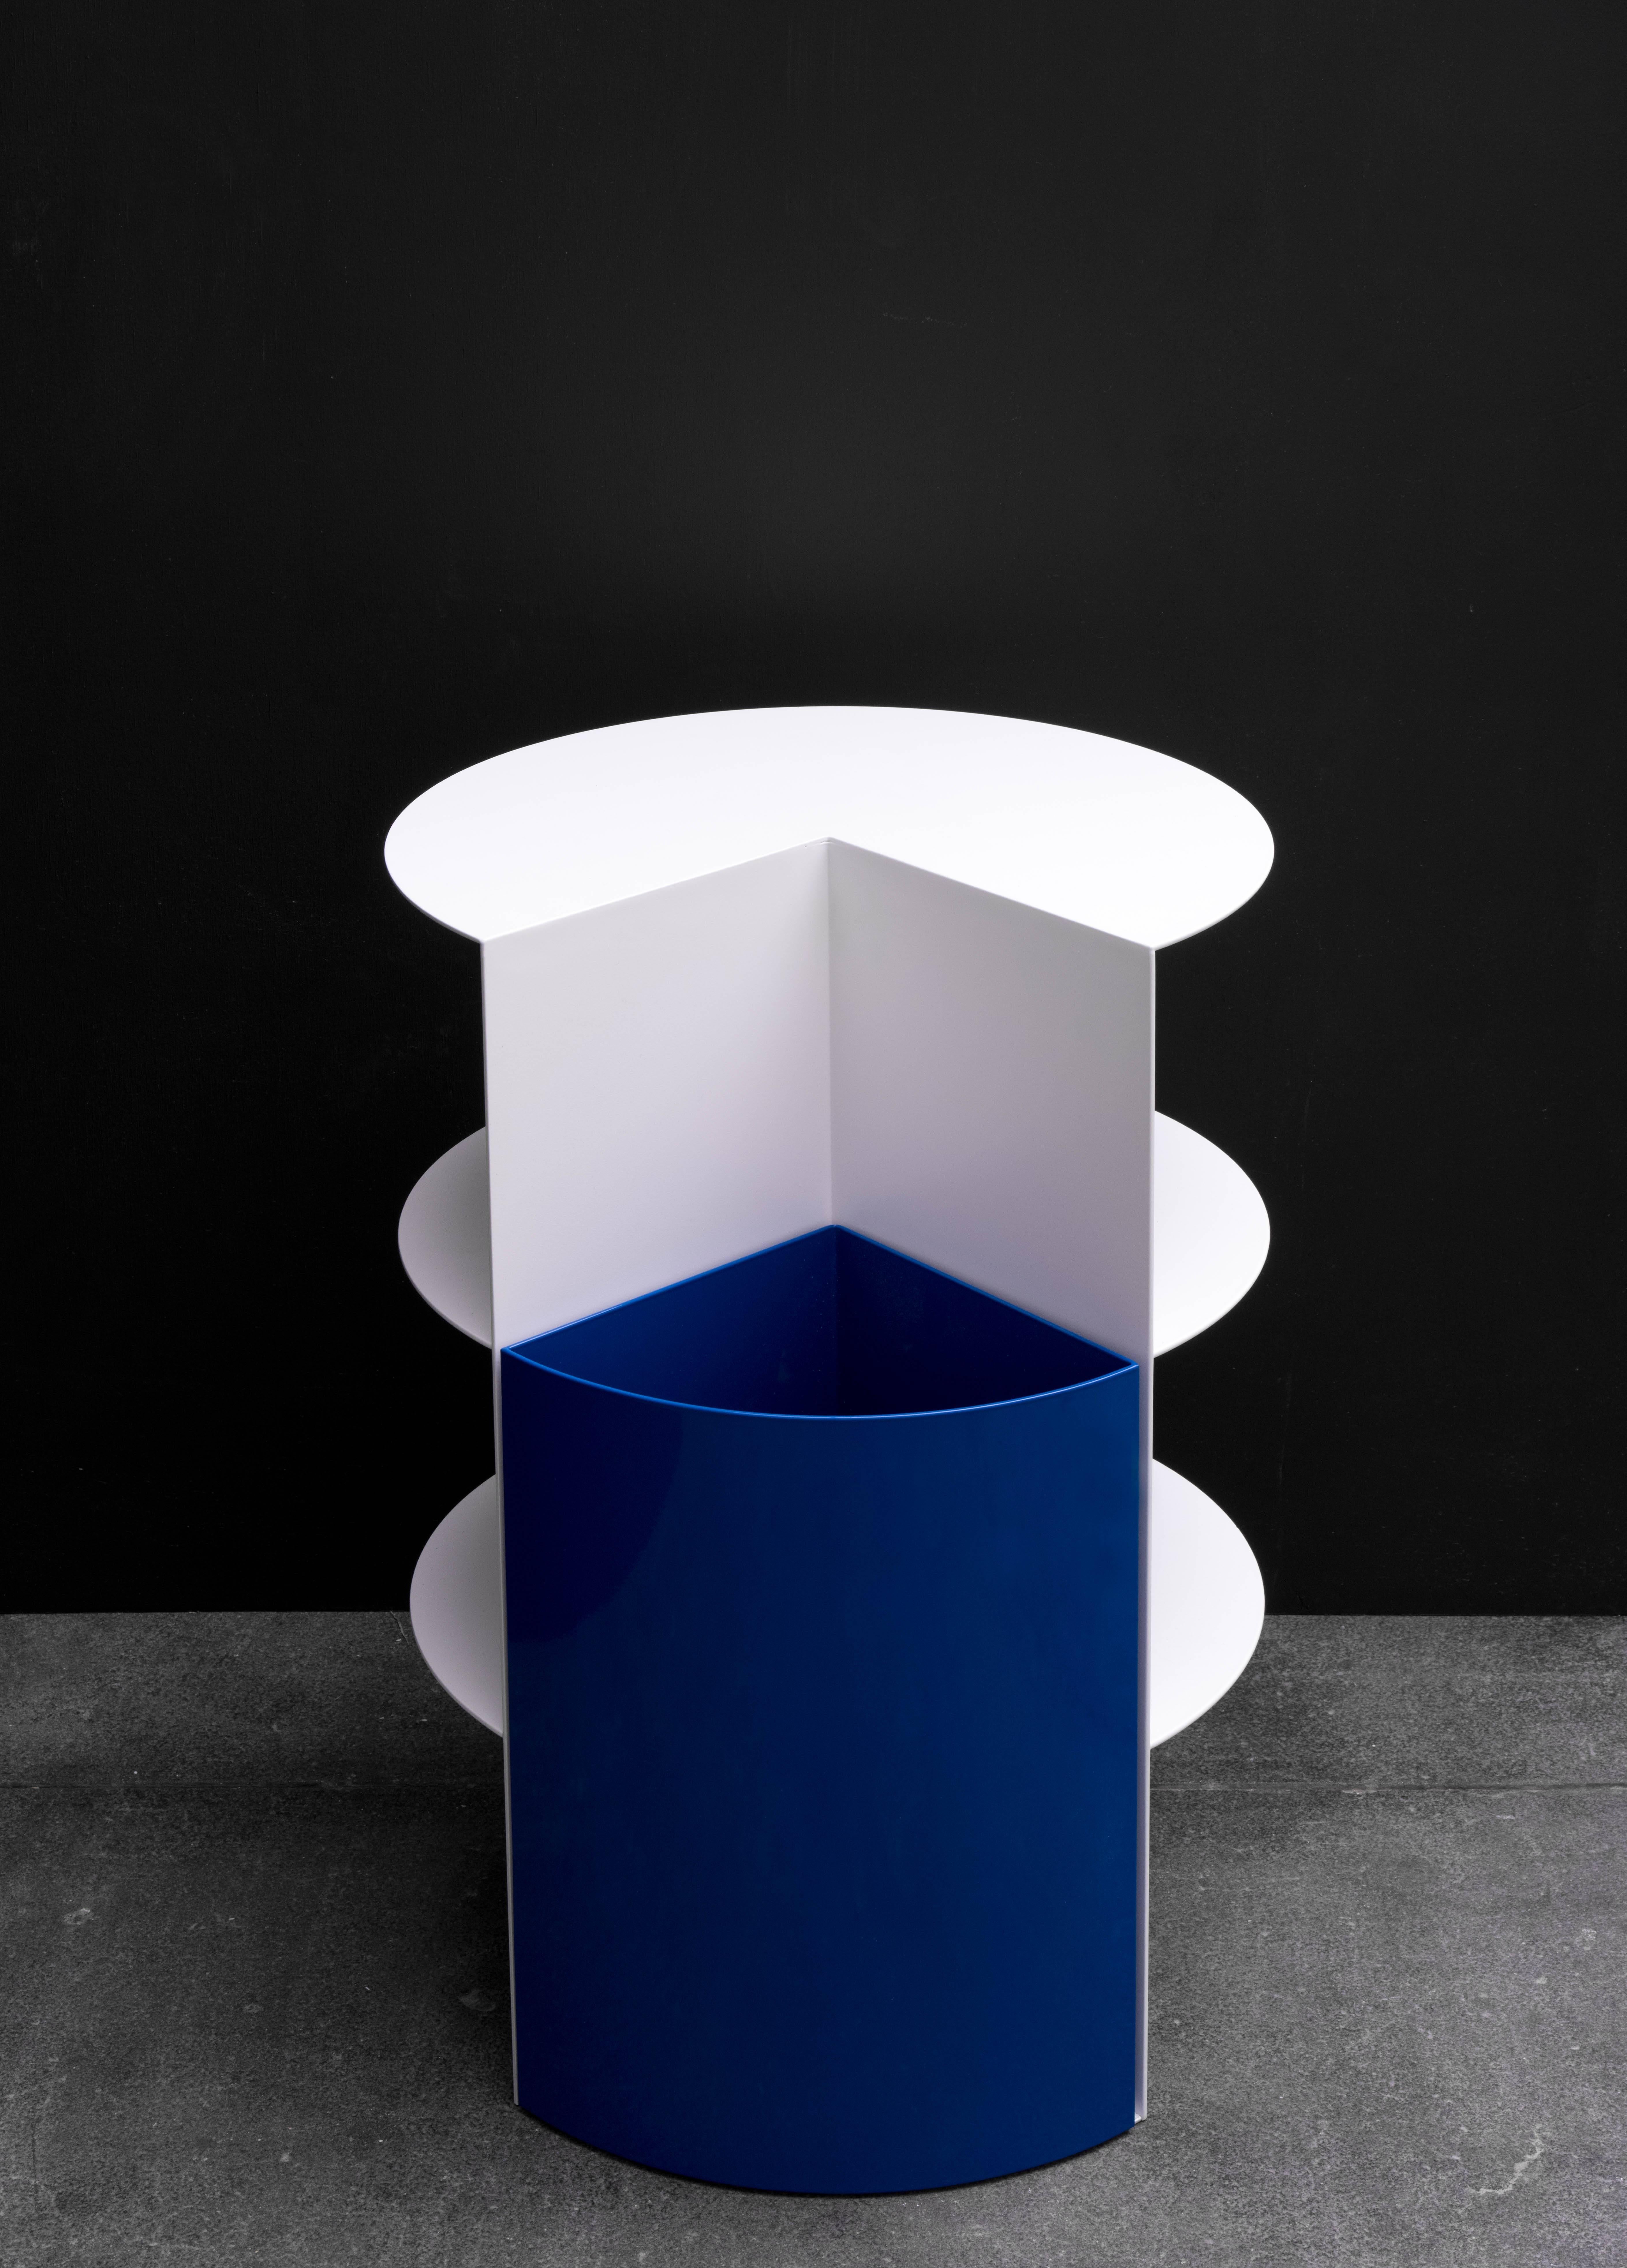 Stark and bold geometric distinctions give the piece a striking silhouette. This design has two elements - a planter bin and cantilevered shelving. The planter, once filled with soil, provides the counterweight to the shelves. This dramatic